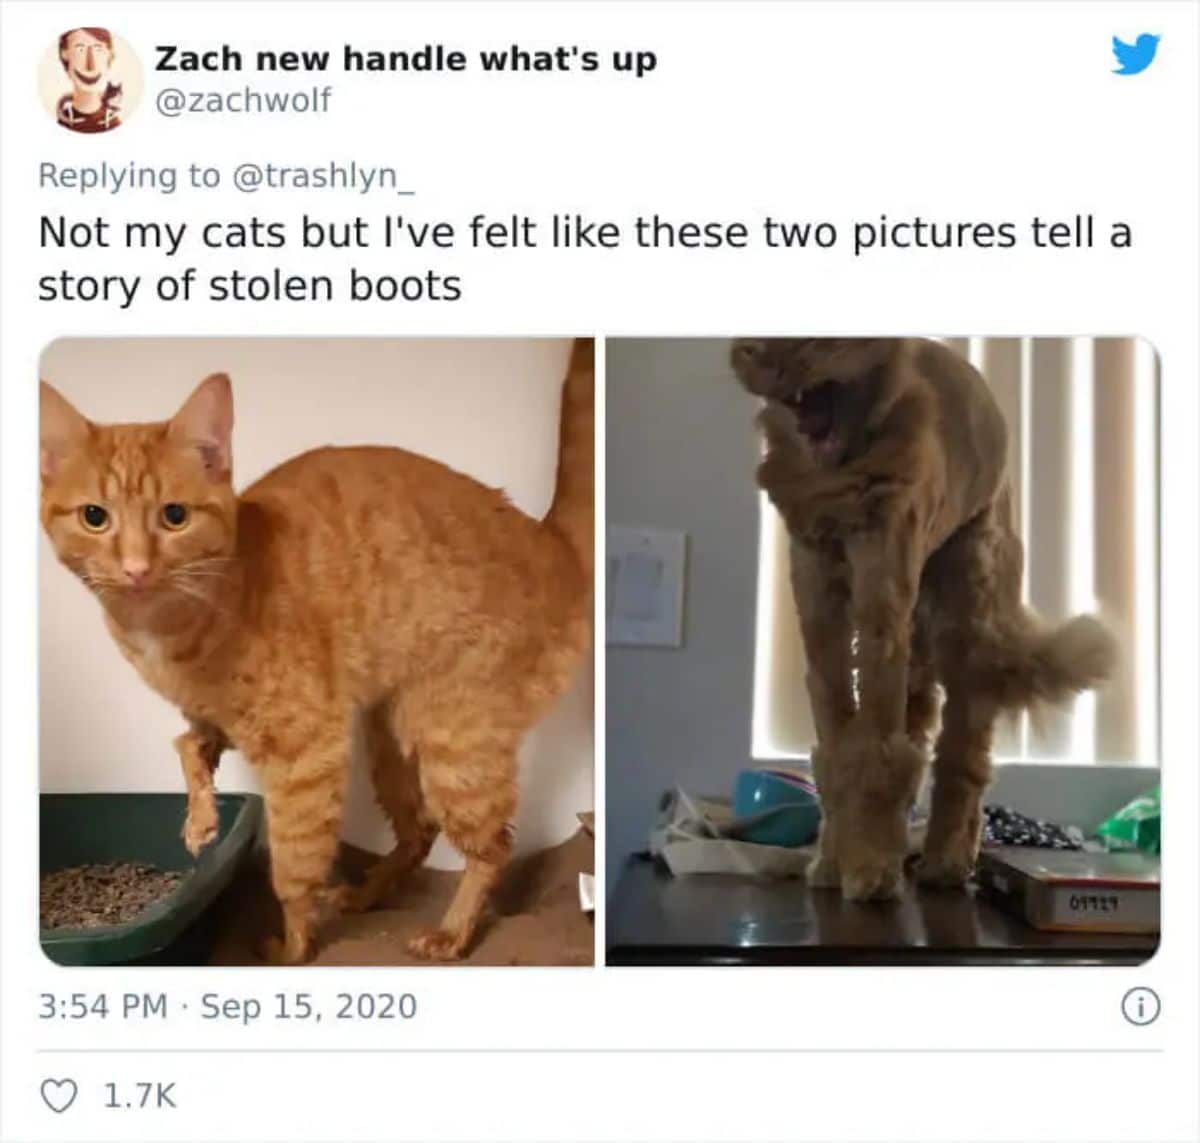 tweet with 2 photos of an orange cat and grey cat with their legs shaved